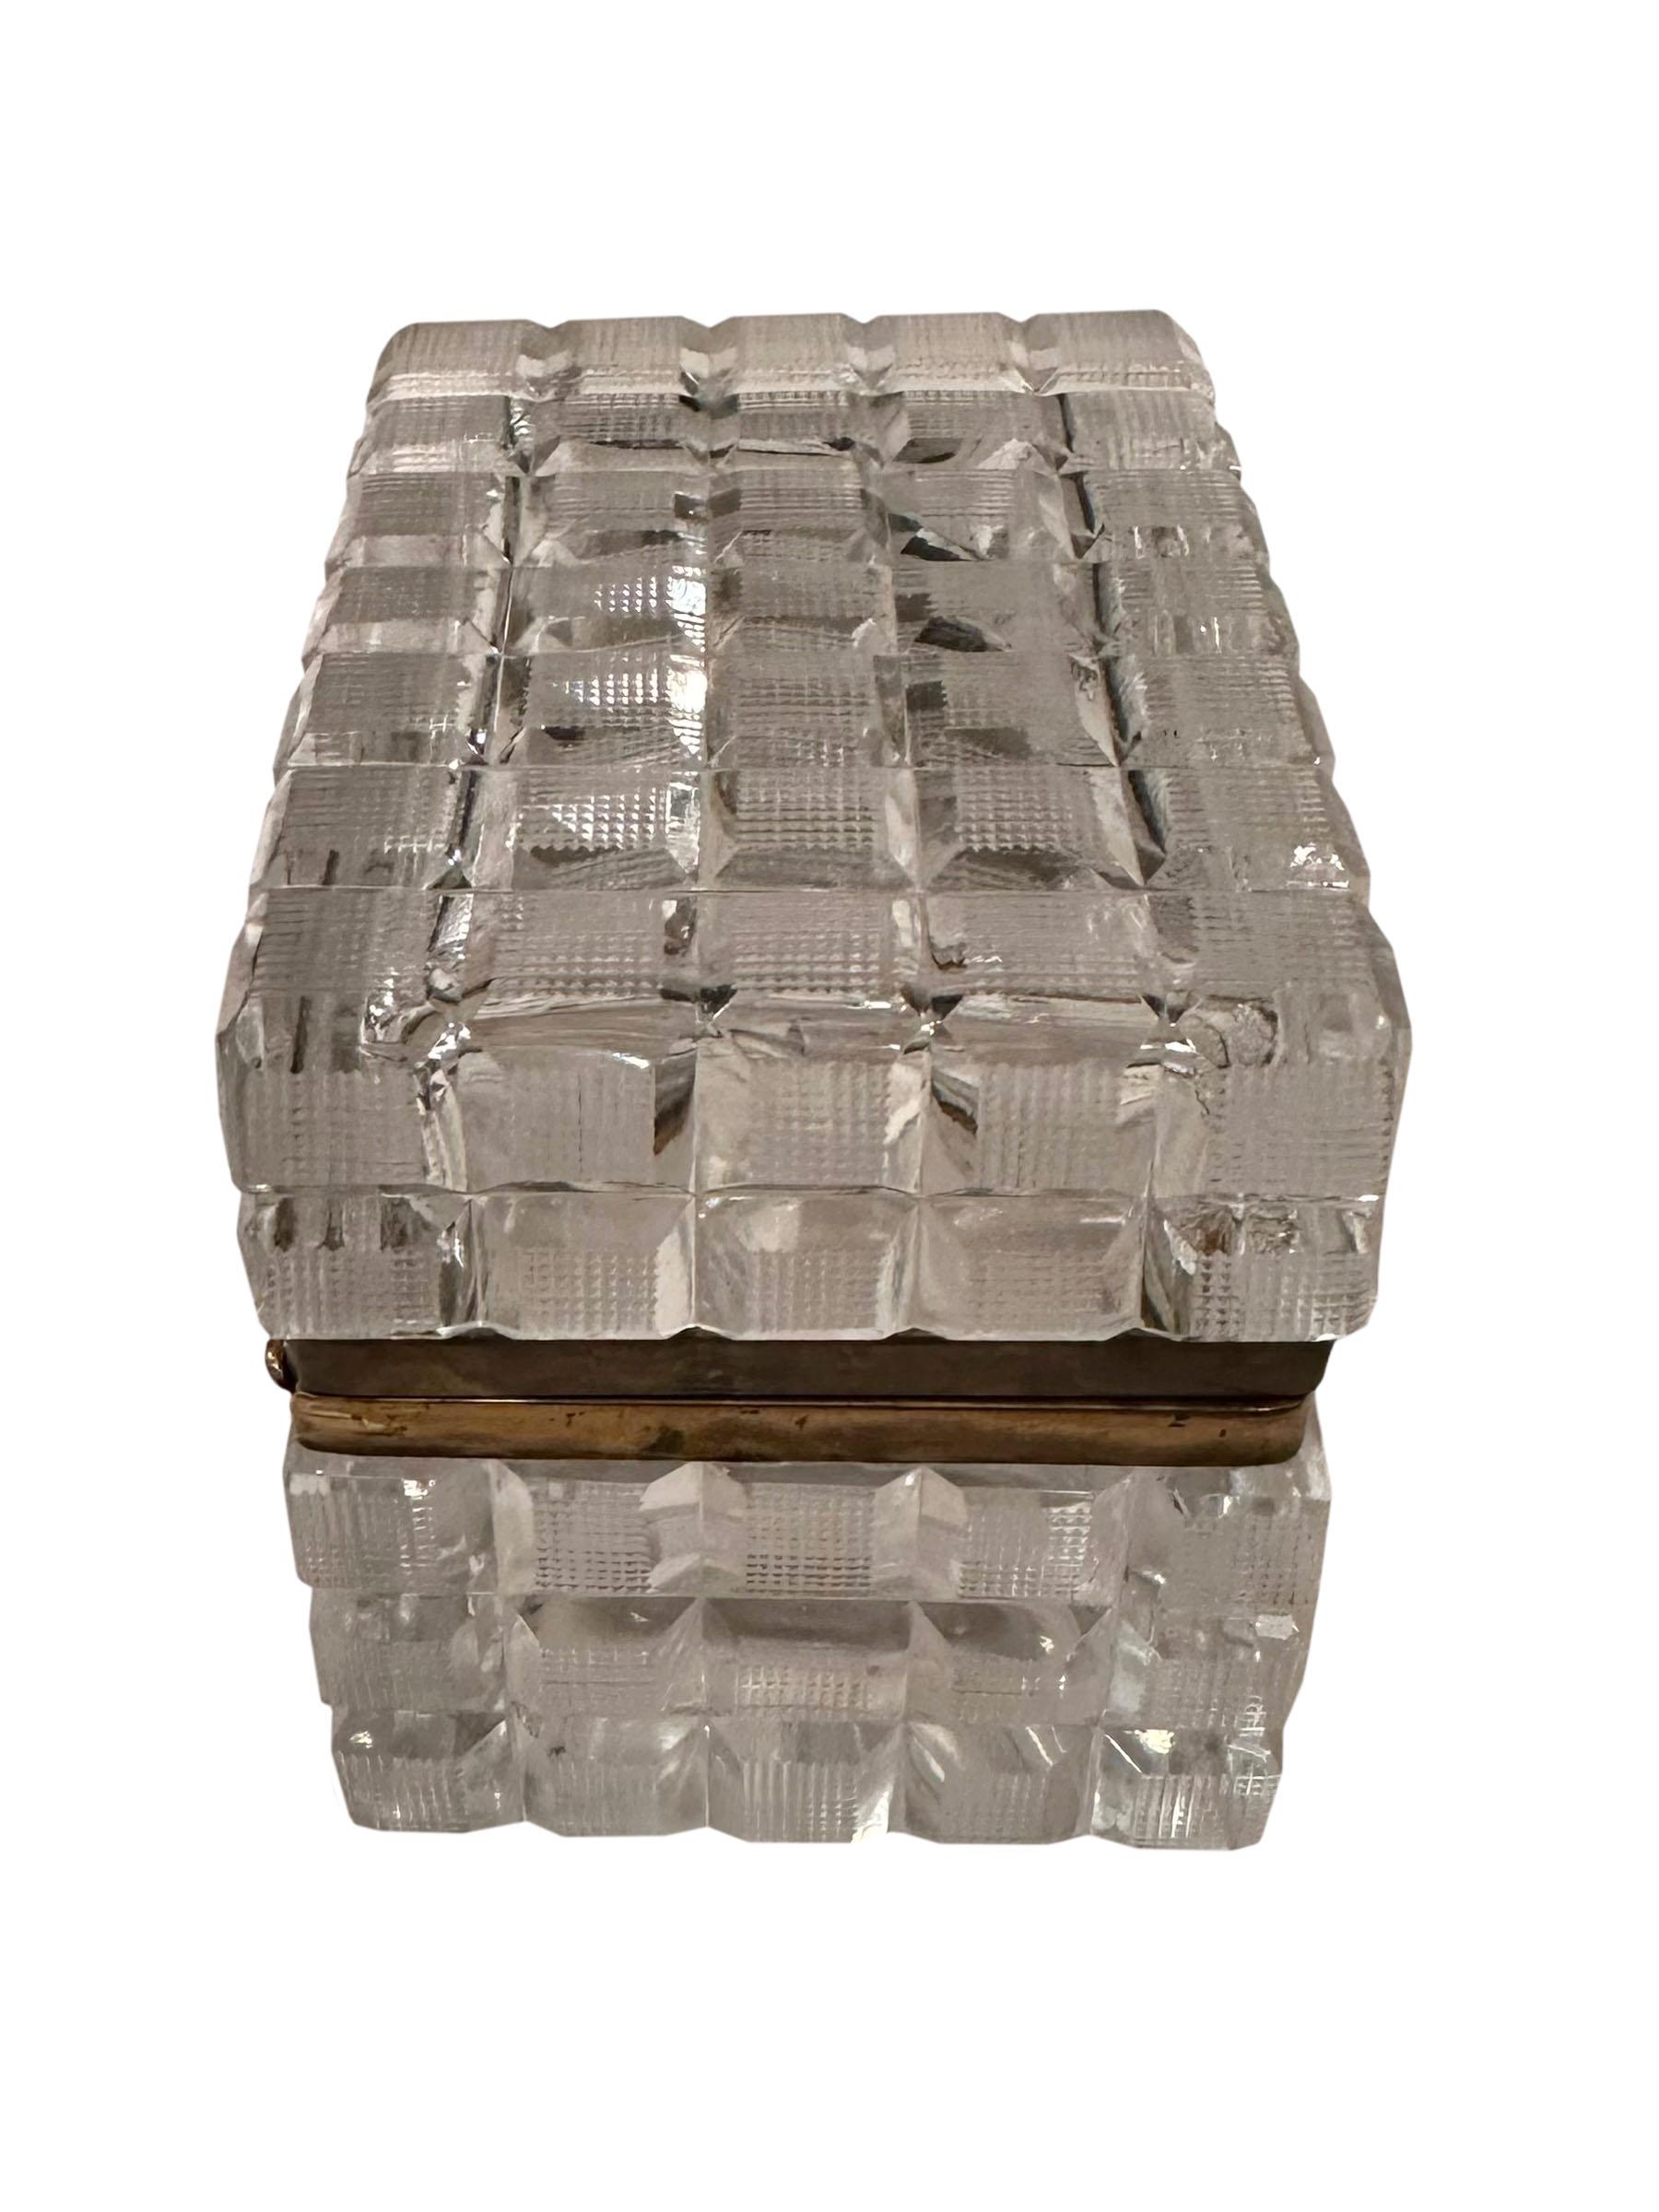 French Rectangular Baccarat Box For Sale 1